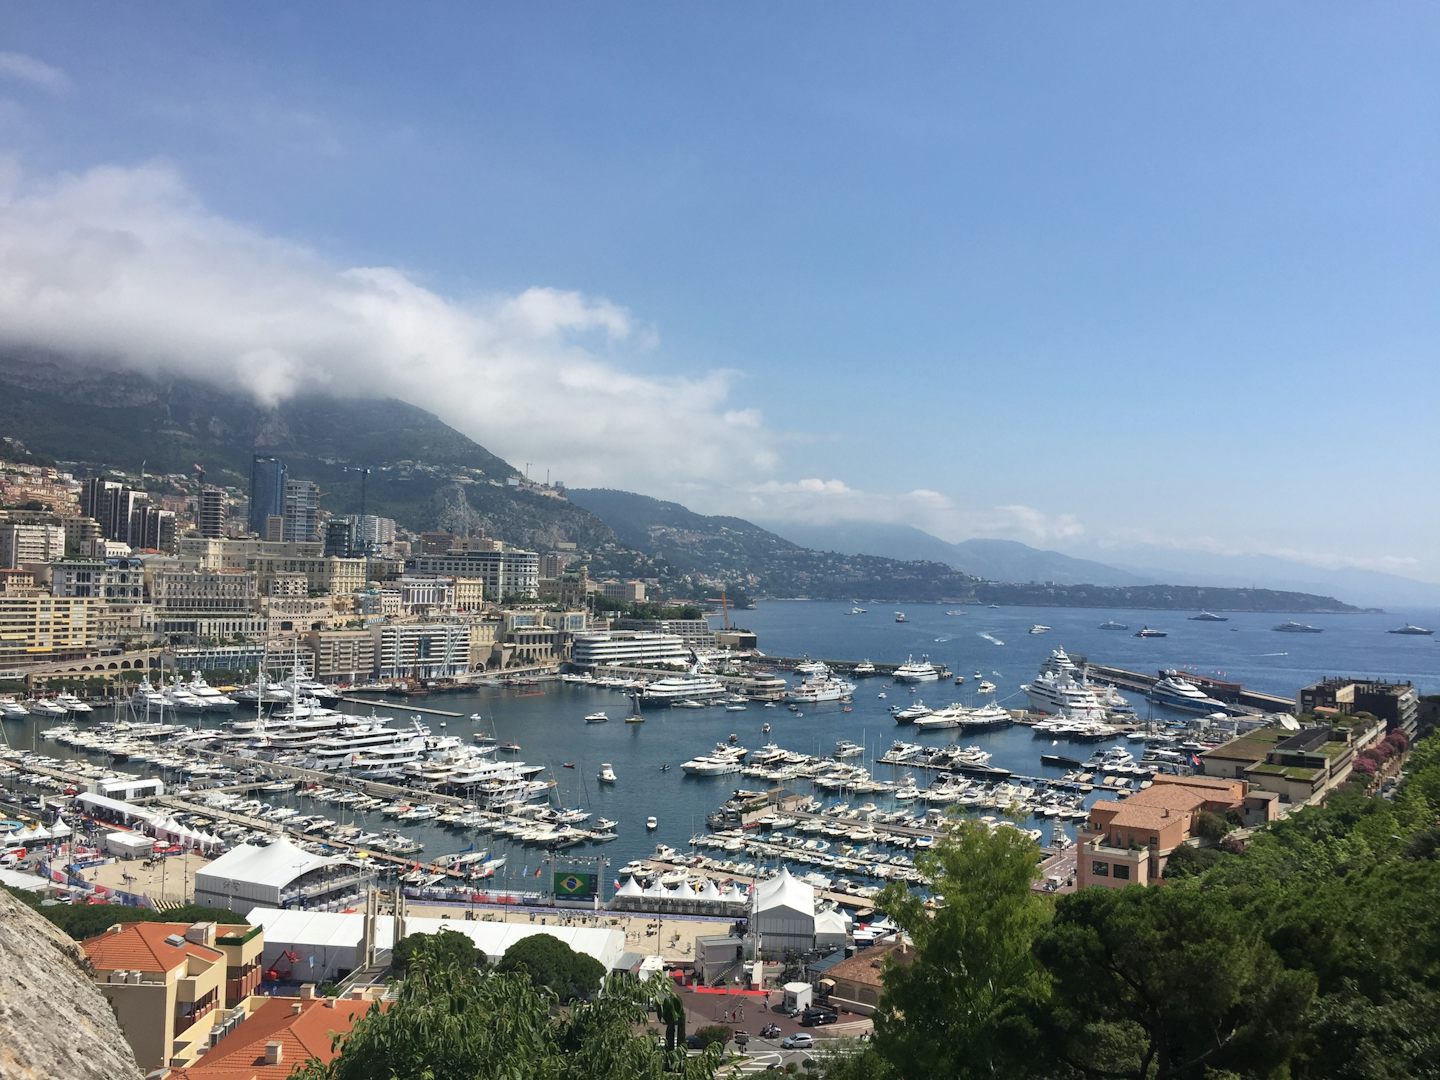 Overlooking the bay in Monaco.  Another very beautiful port